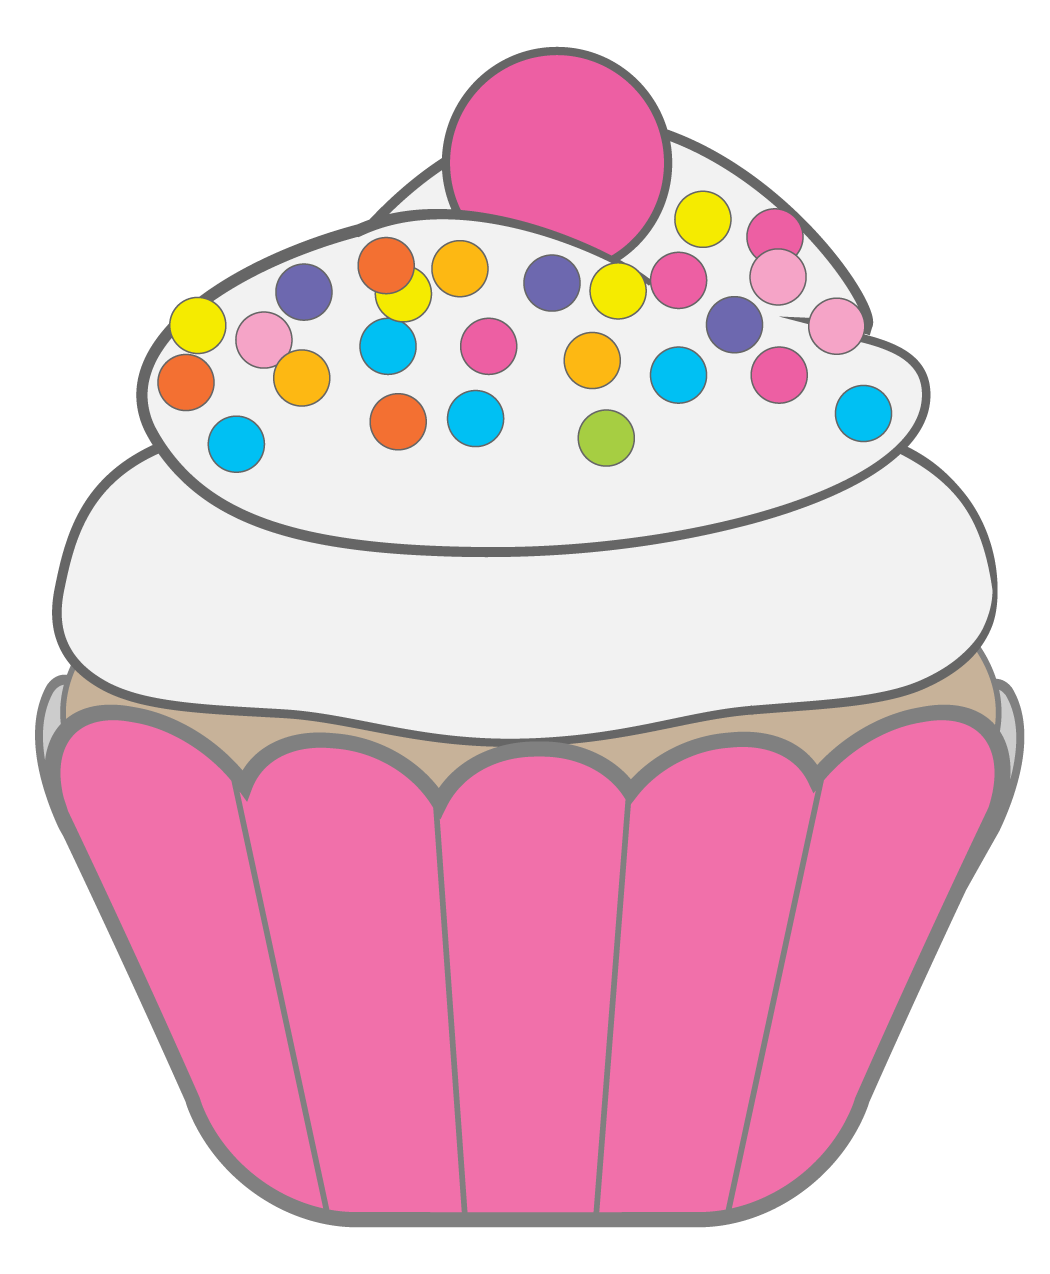 Happy Birthday Cupcake Clipart   Clipart Panda   Free Clipart Images